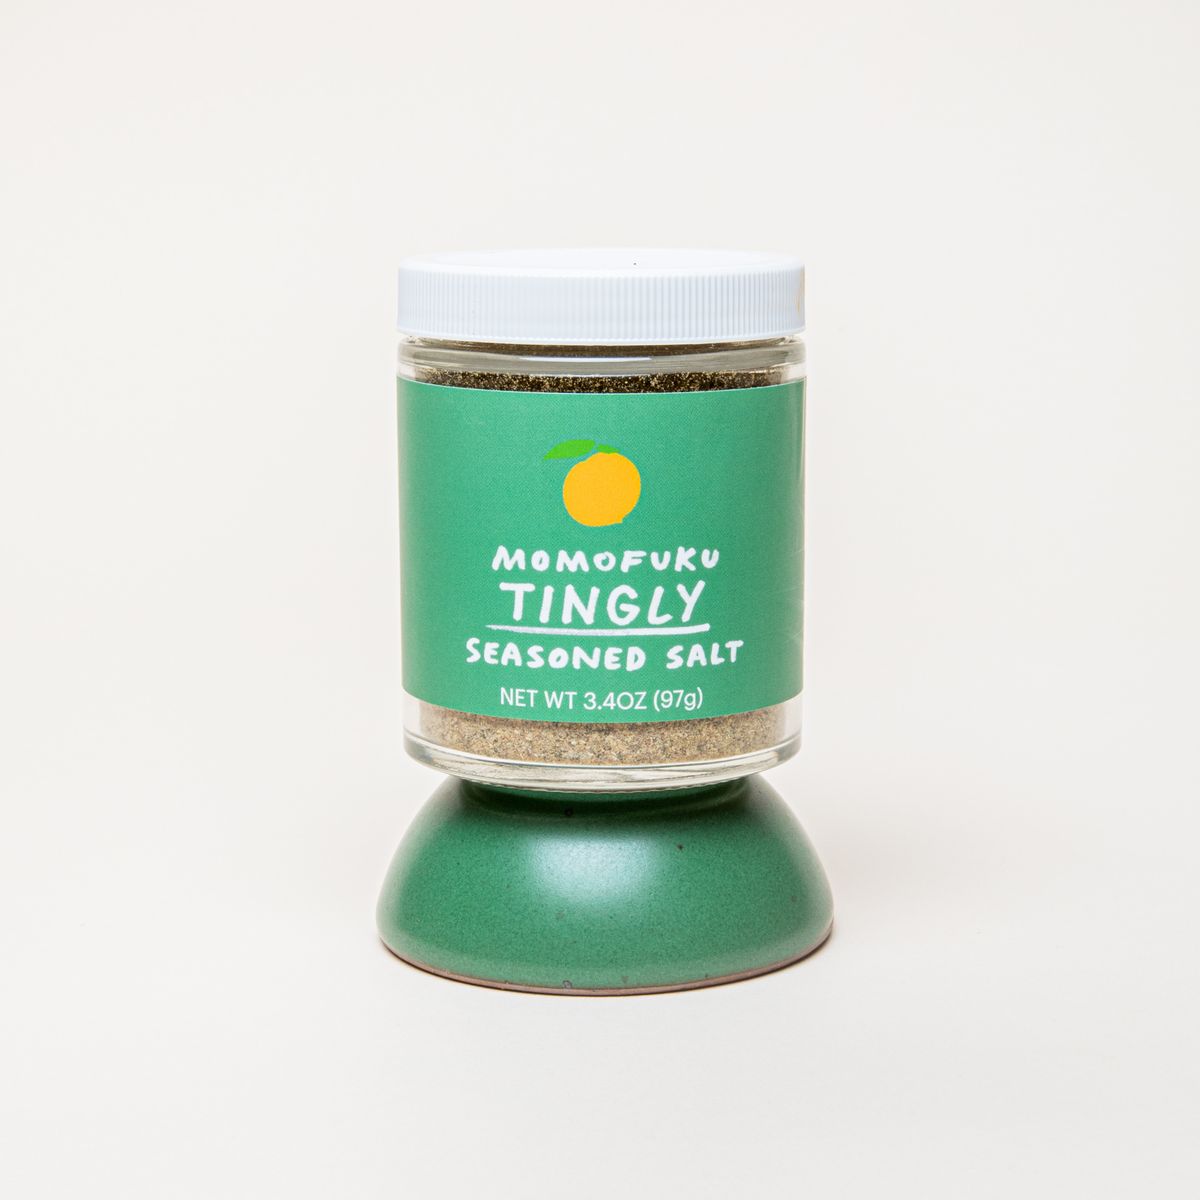 Short jar of salt with a white top and a green label that reads "Momofuku Tingly Seasoned Salt", sitting on an upside down small ceramic bowl